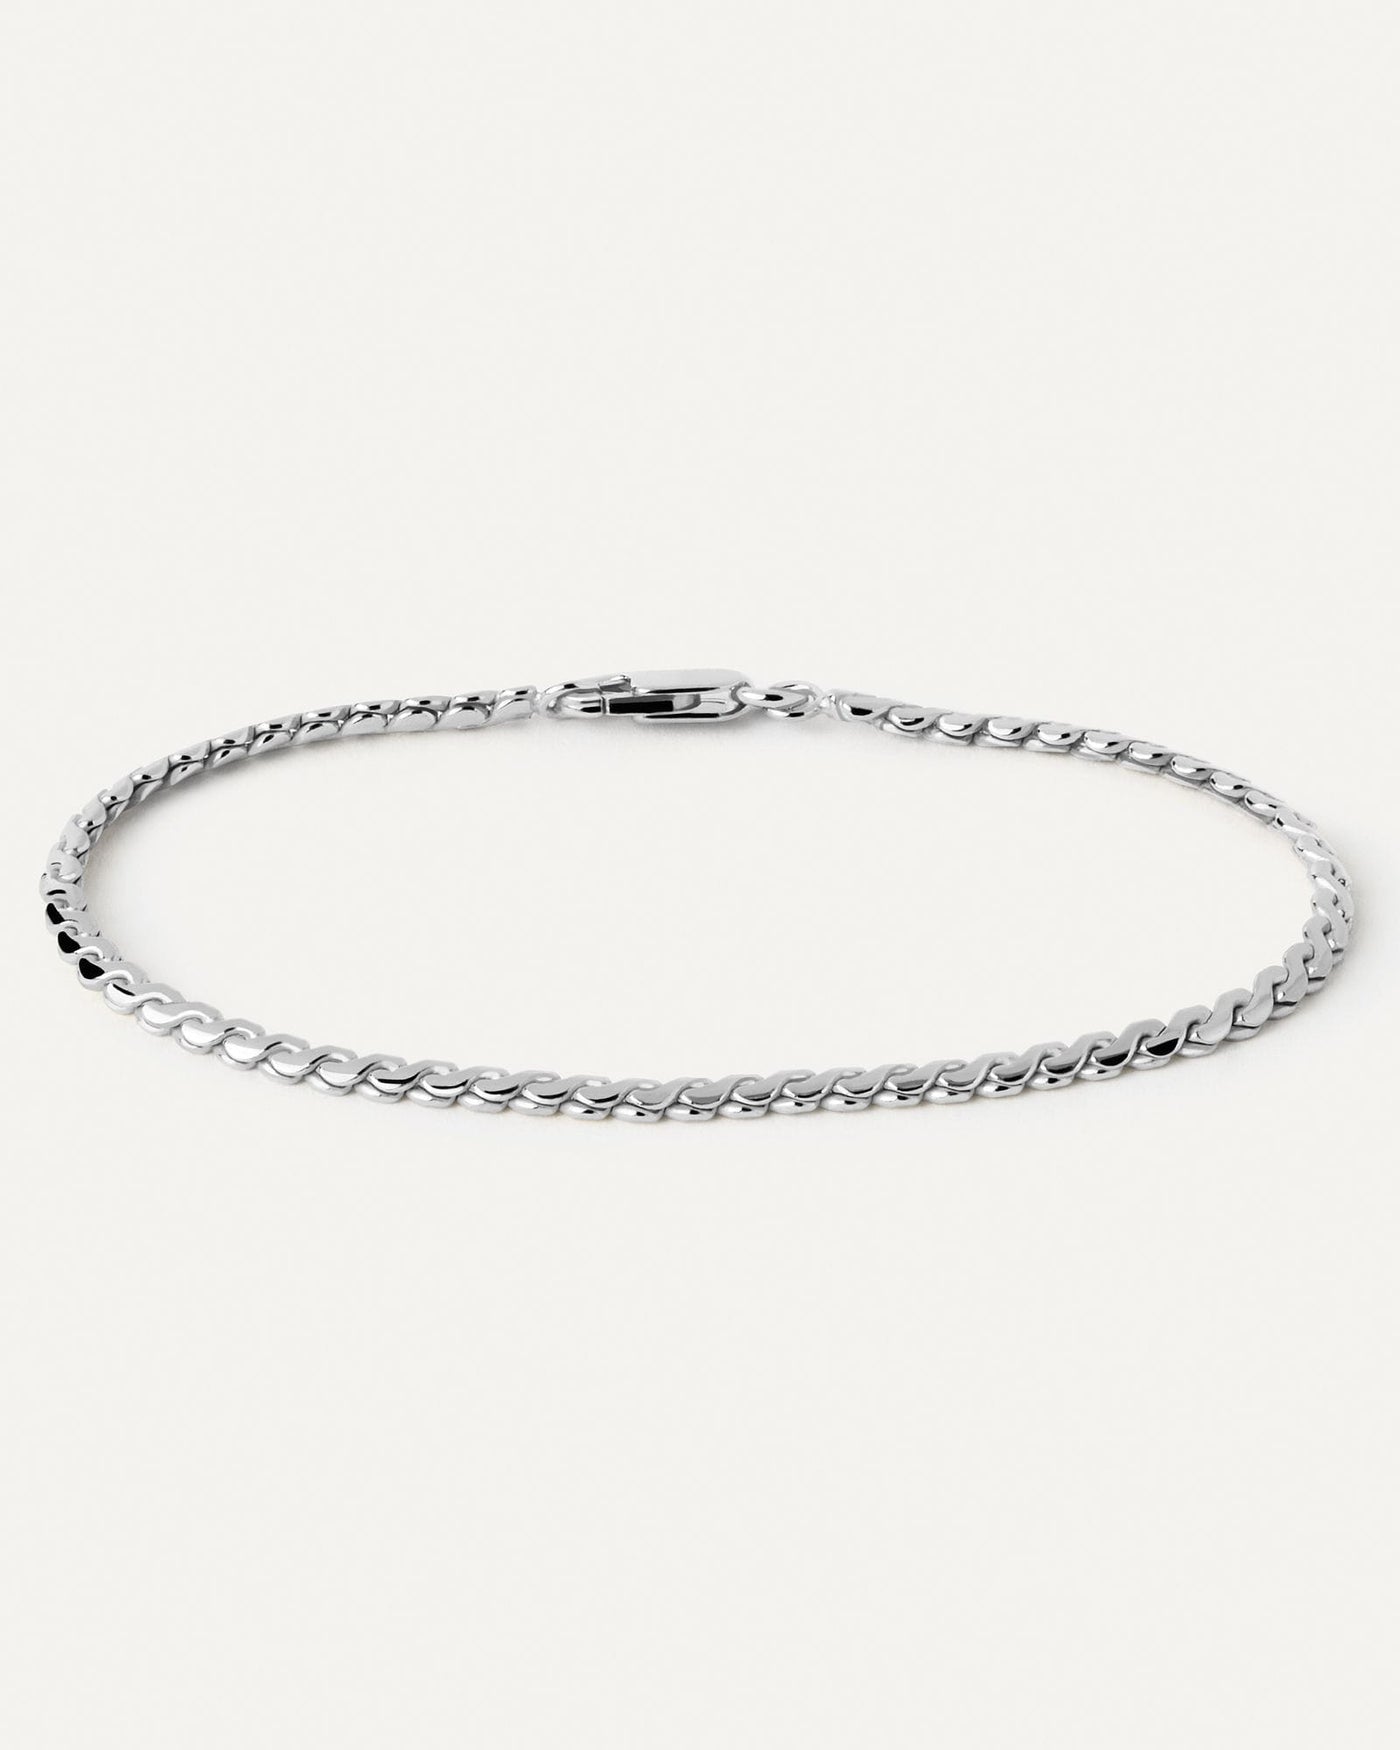 2024 Selection | Serpentine Silver Chain Bracelet. Modern serpentine silver chain bracelet with braided links. Get the latest arrival from PDPAOLA. Place your order safely and get this Best Seller. Free Shipping.